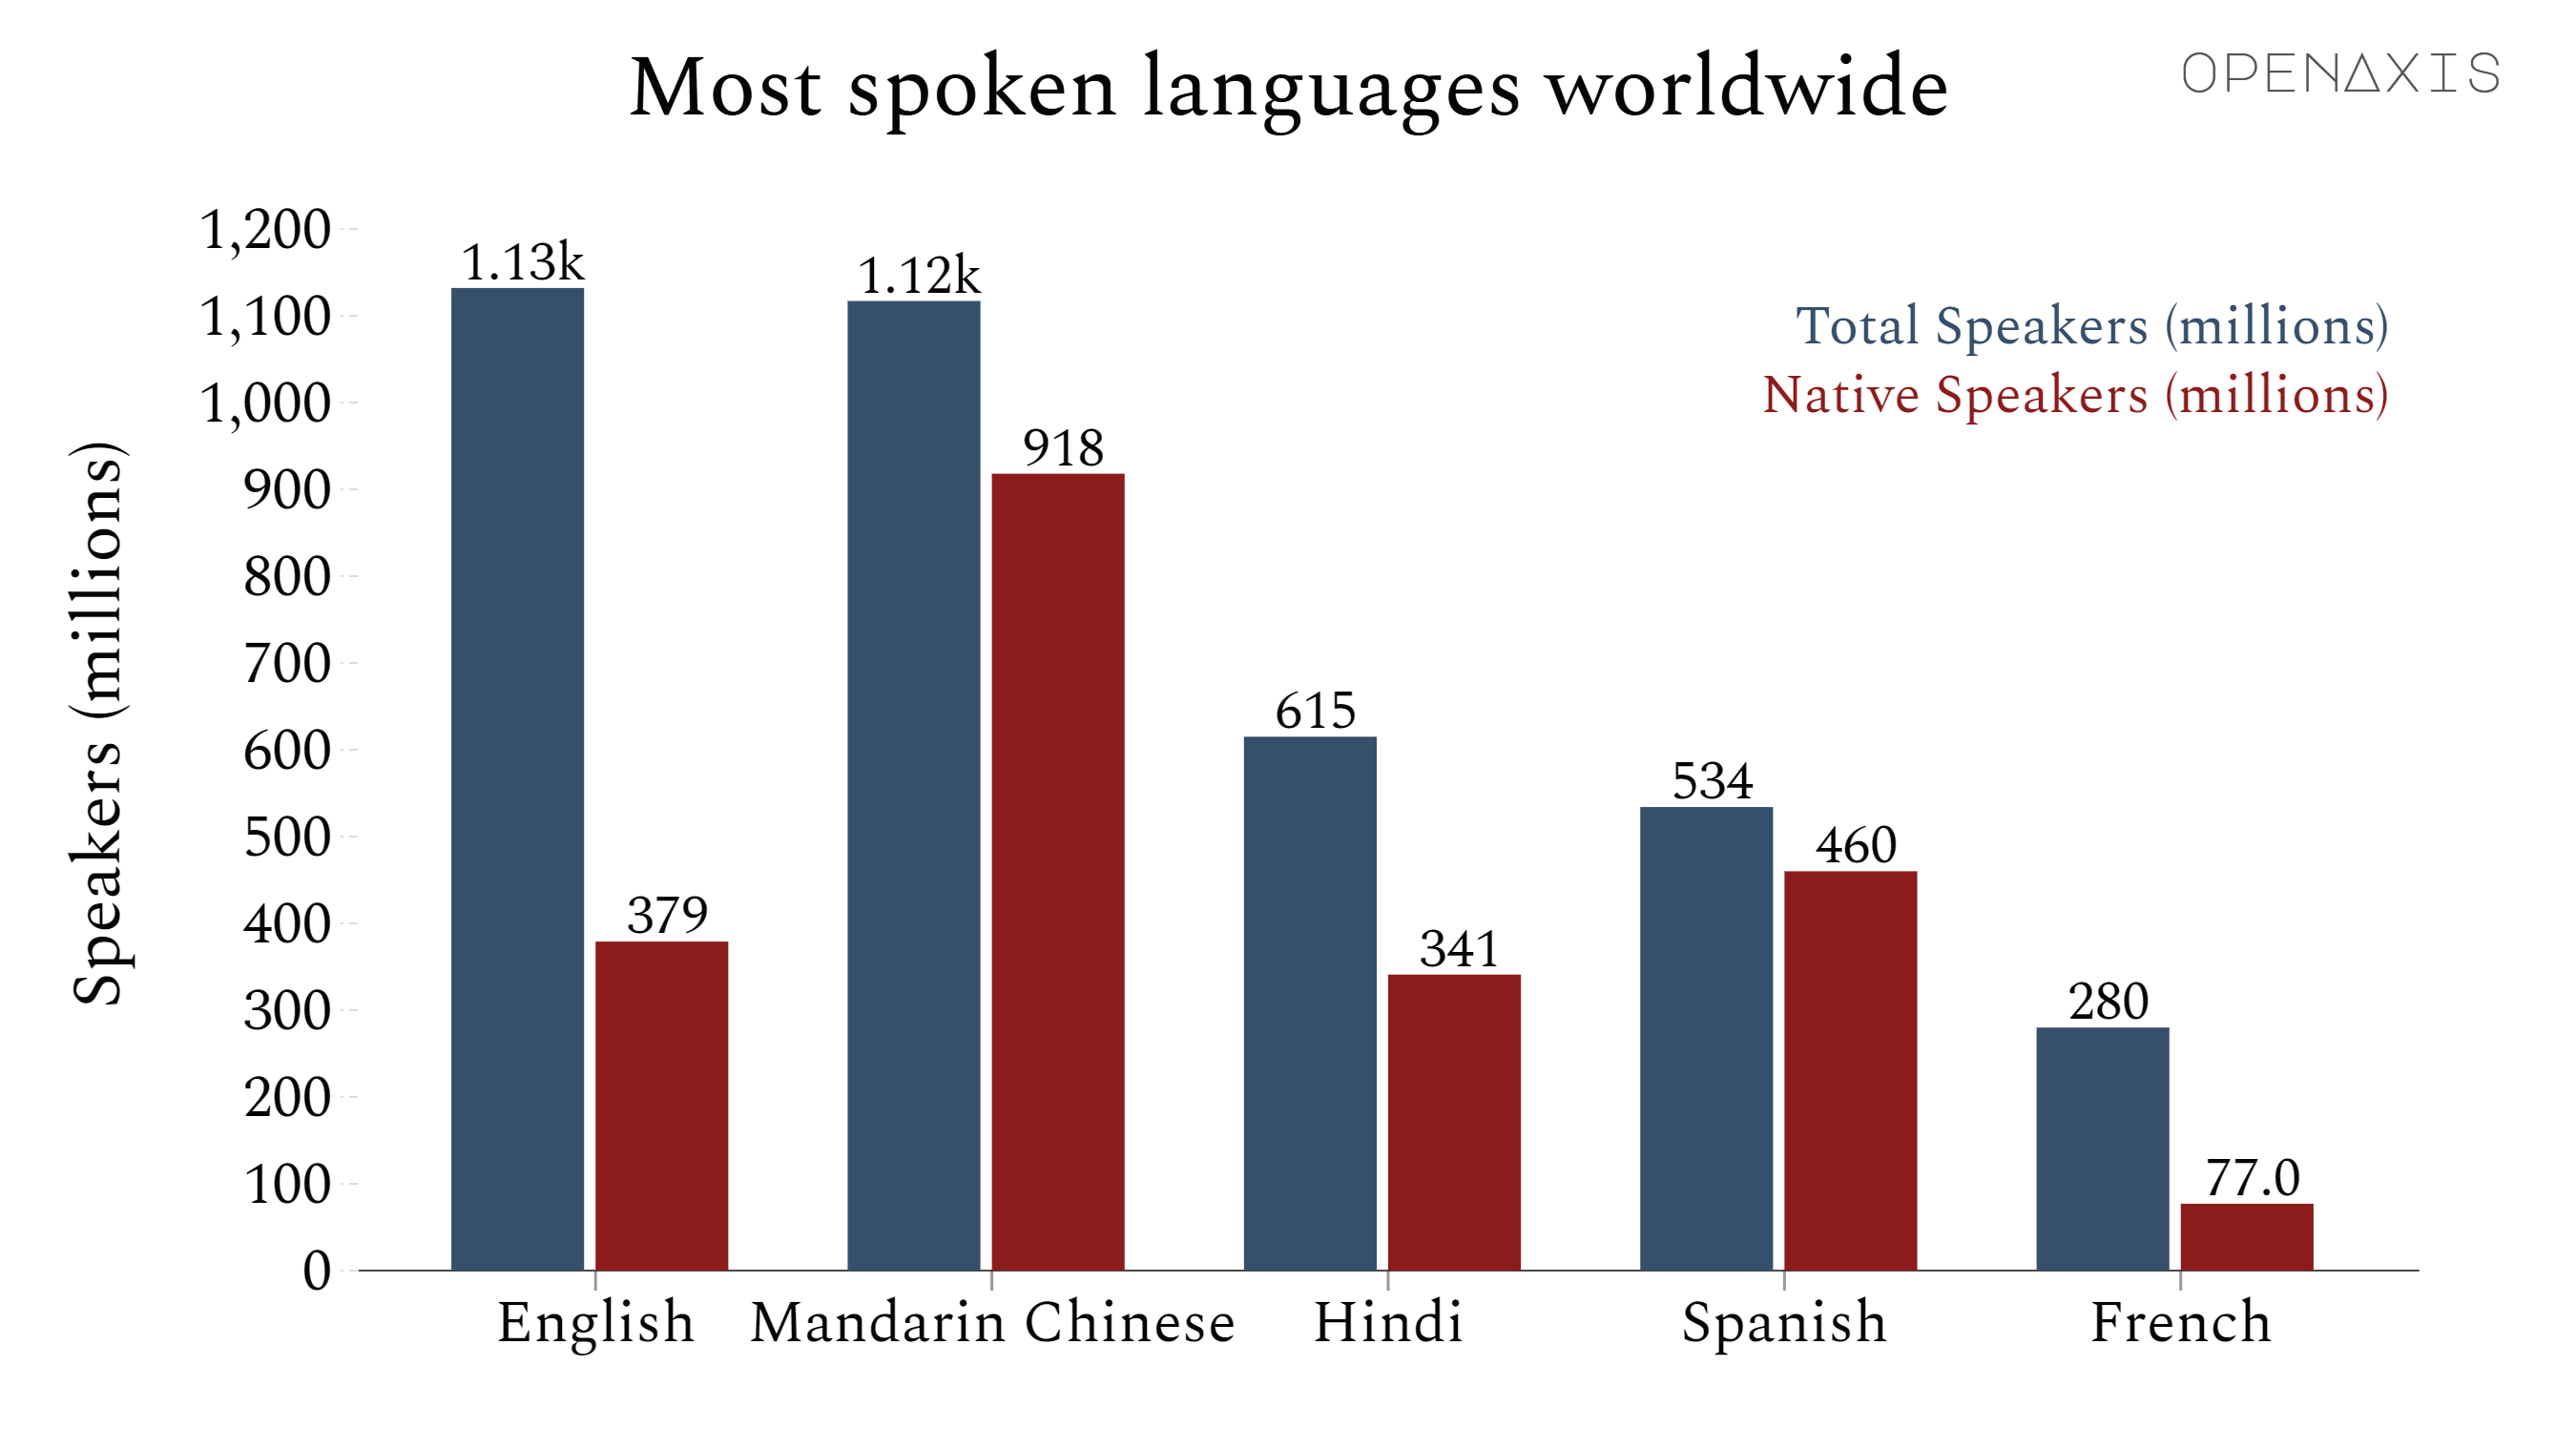 <p>English is the largest language in the world, if you count both native and non-native speakers. If you count only native speakers, Mandarin Chinese is the largest.</p><p><br /></p><p><span data-index="0" data-denotation-char data-id="0" data-value="&lt;a href=&quot;/search?q=%23languages&quot; target=_self&gt;#languages" data-link="/search?q=%23languages">﻿<span contenteditable="false"><span></span><a href="/search?q=%23languages" target="_self">#languages</a></span>﻿</span></p><p><br /></p><p>Source: <a href="/data/3843" target="_blank">Ethnologue</a></p><p><br /></p>